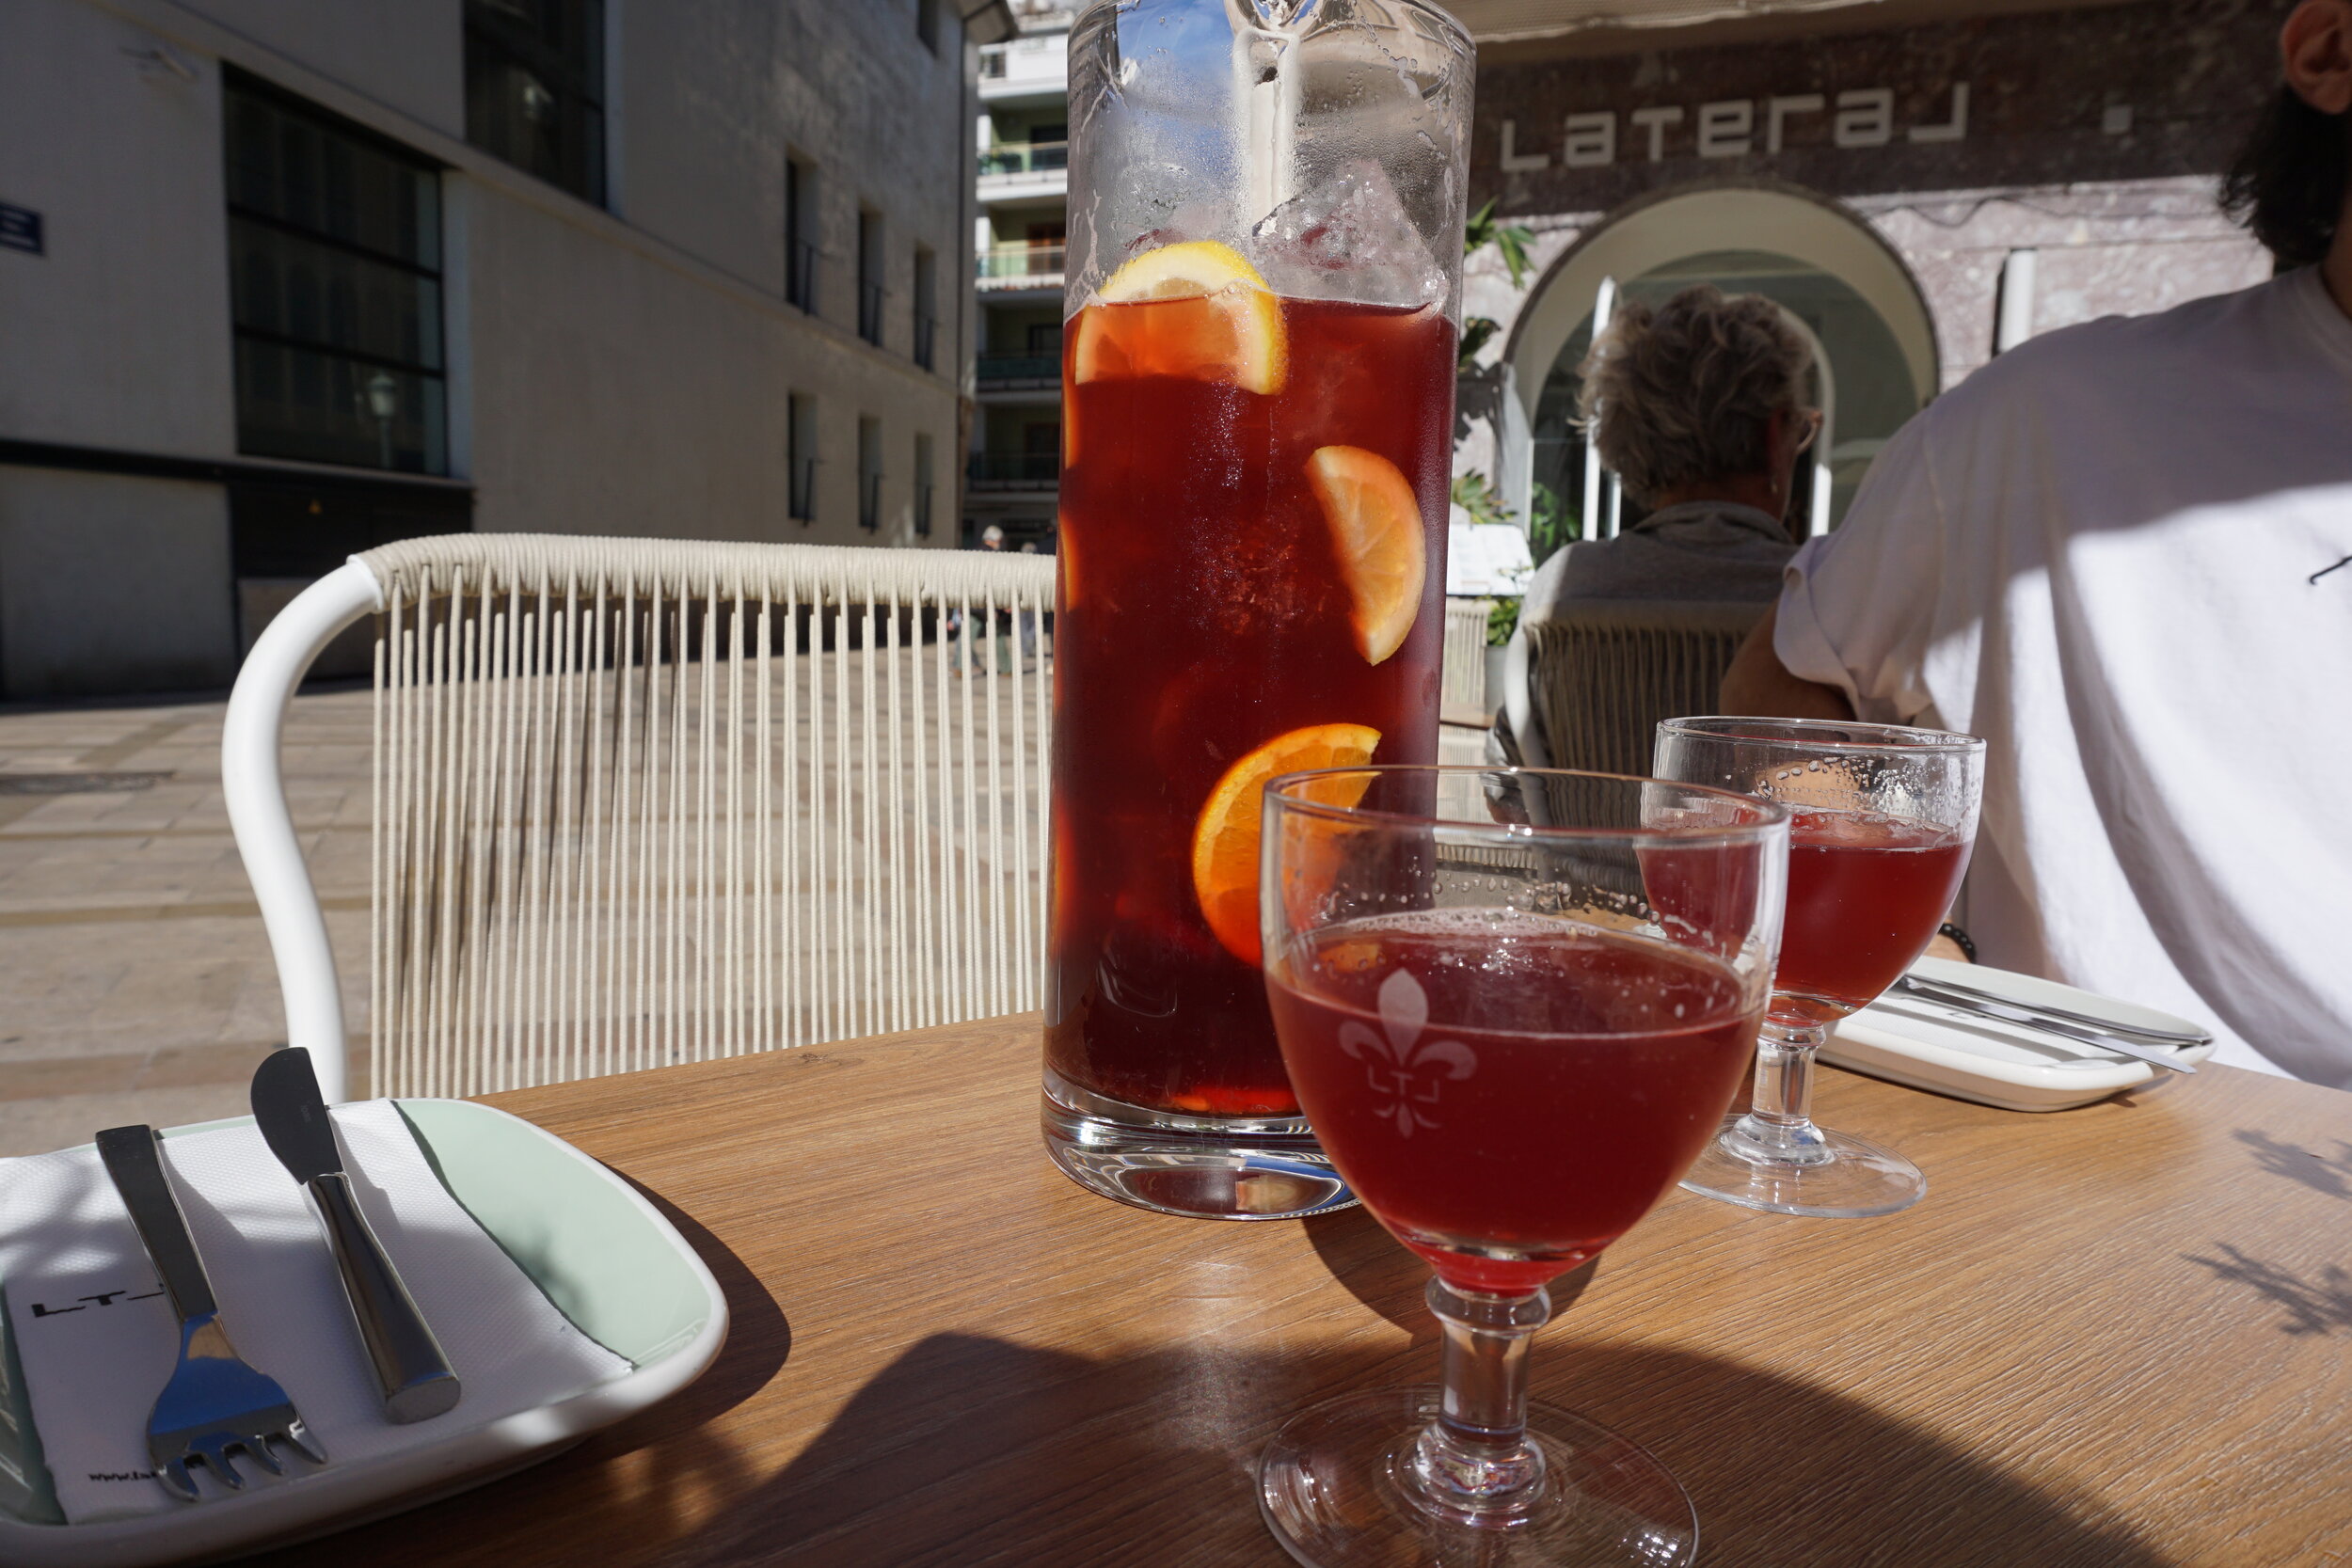 Sangria, the famous Spanish wine drink goes well with the food in Valencia.